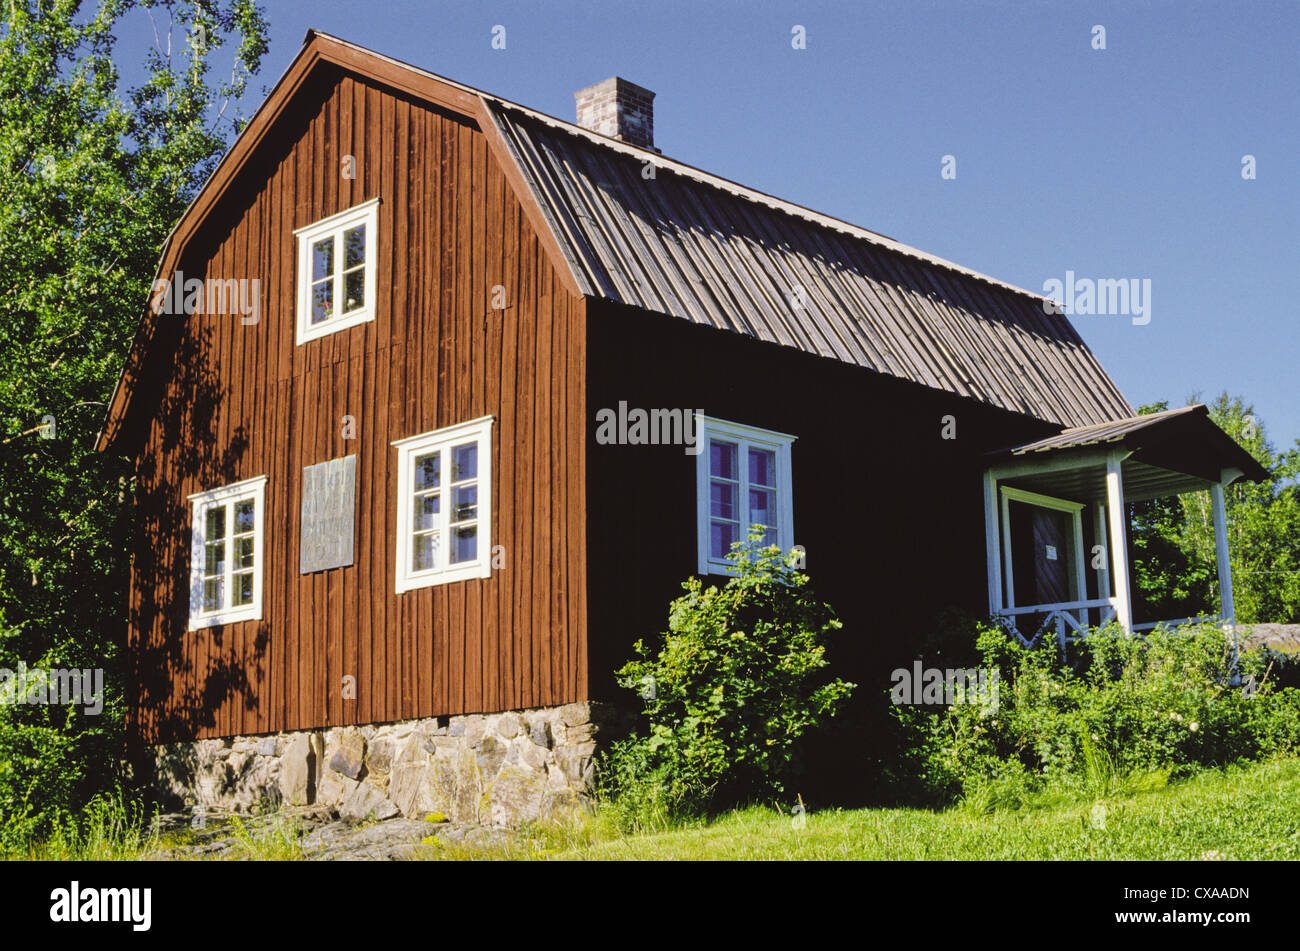 A wood sided home with a stone foundation and a gambrel roof in Palojoki, Finland.  It is the birthplace of Finnish author Aleksis Kivi. Stock Photo